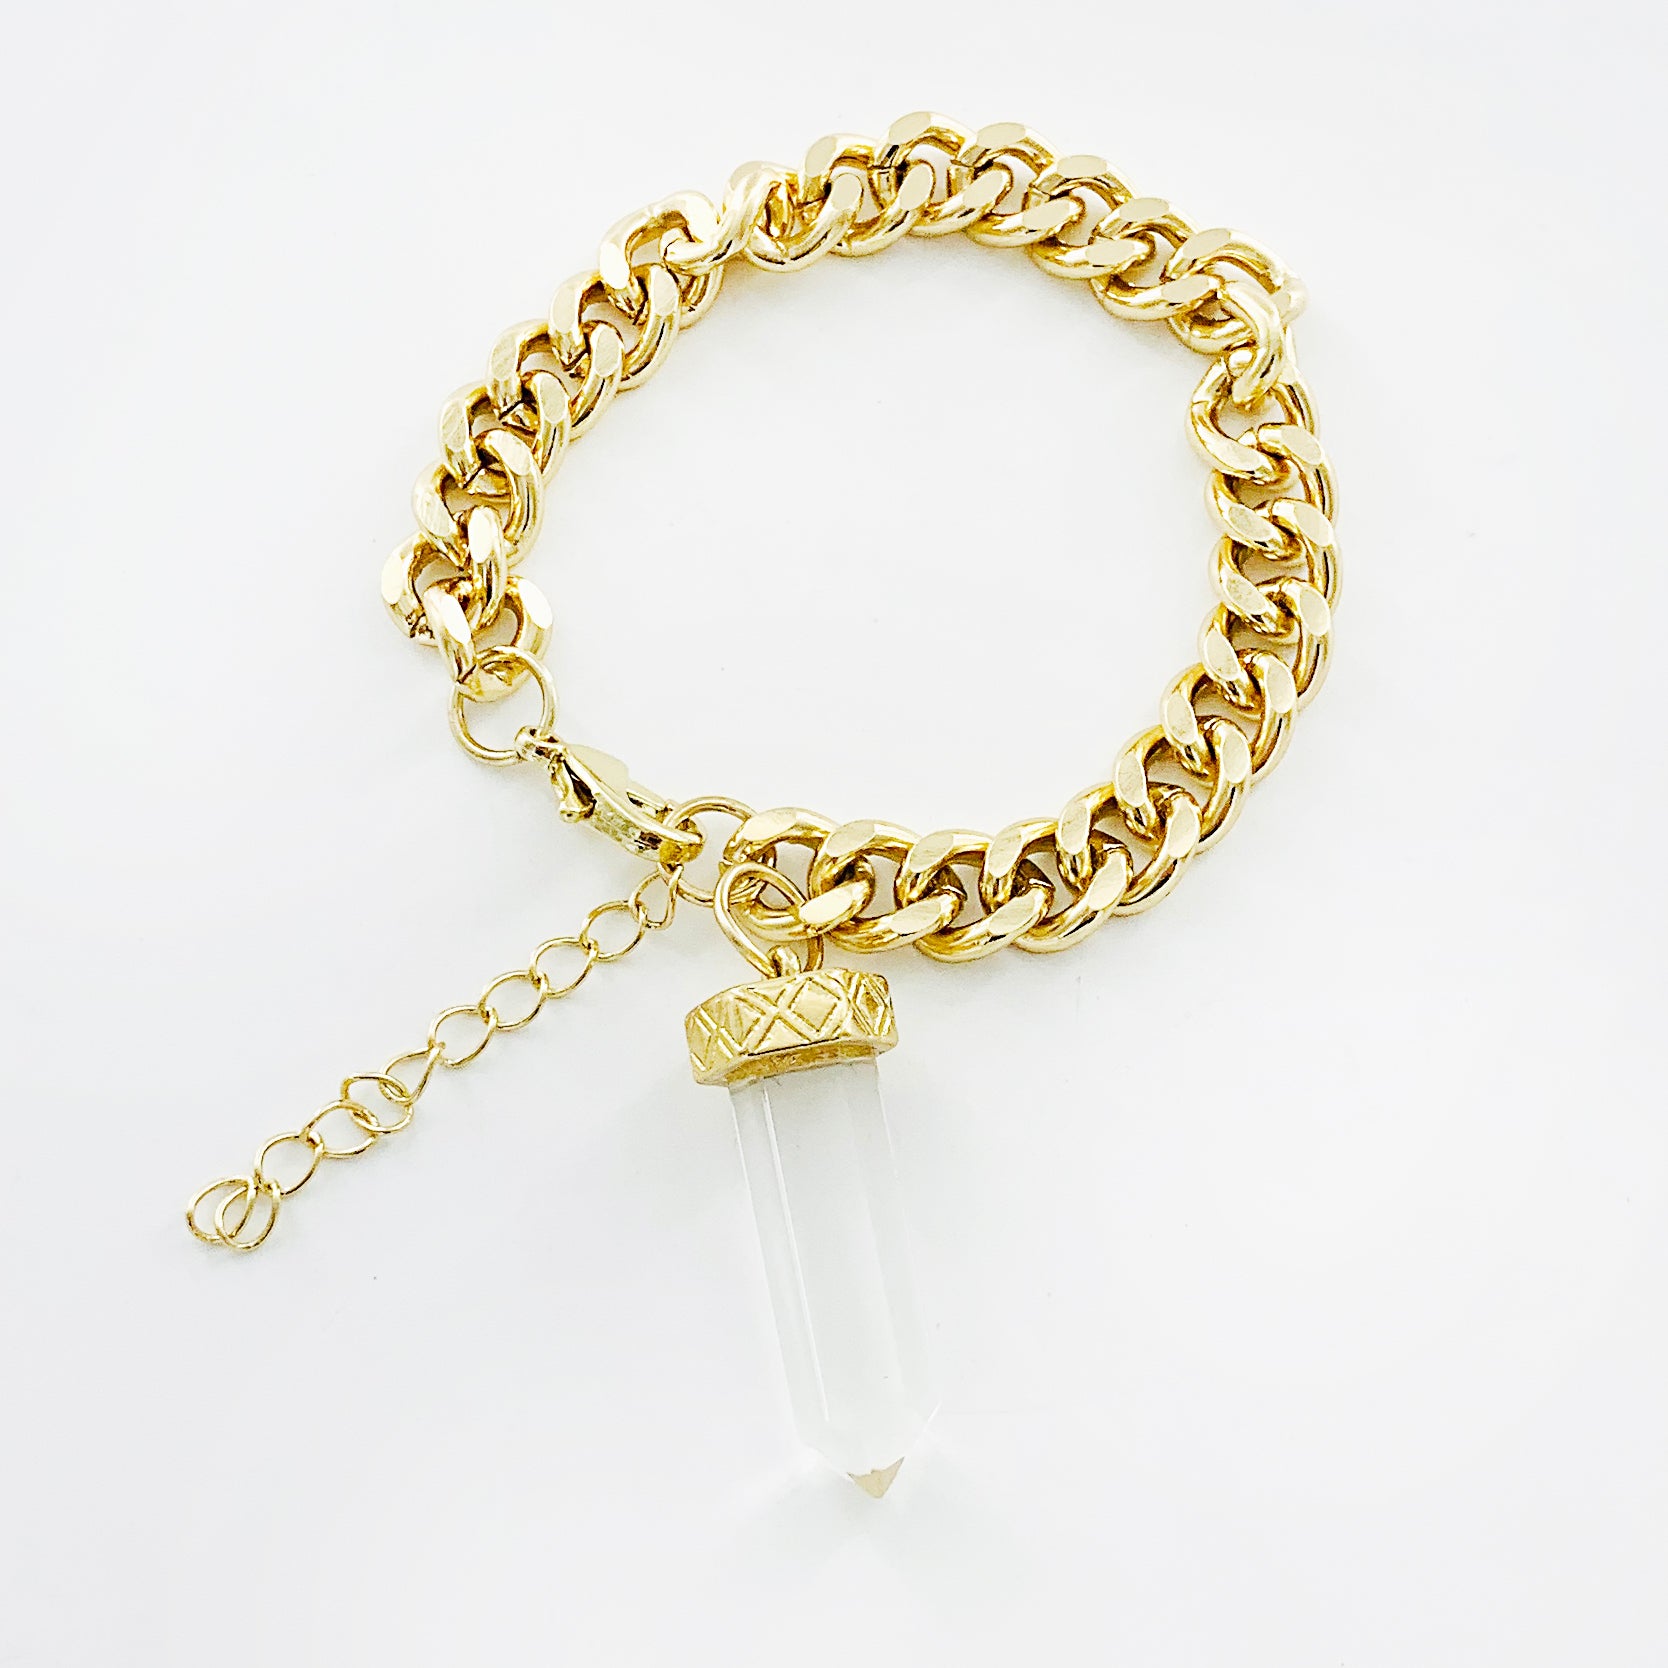 Chunky gold chain bracelet with clear obelisk stone